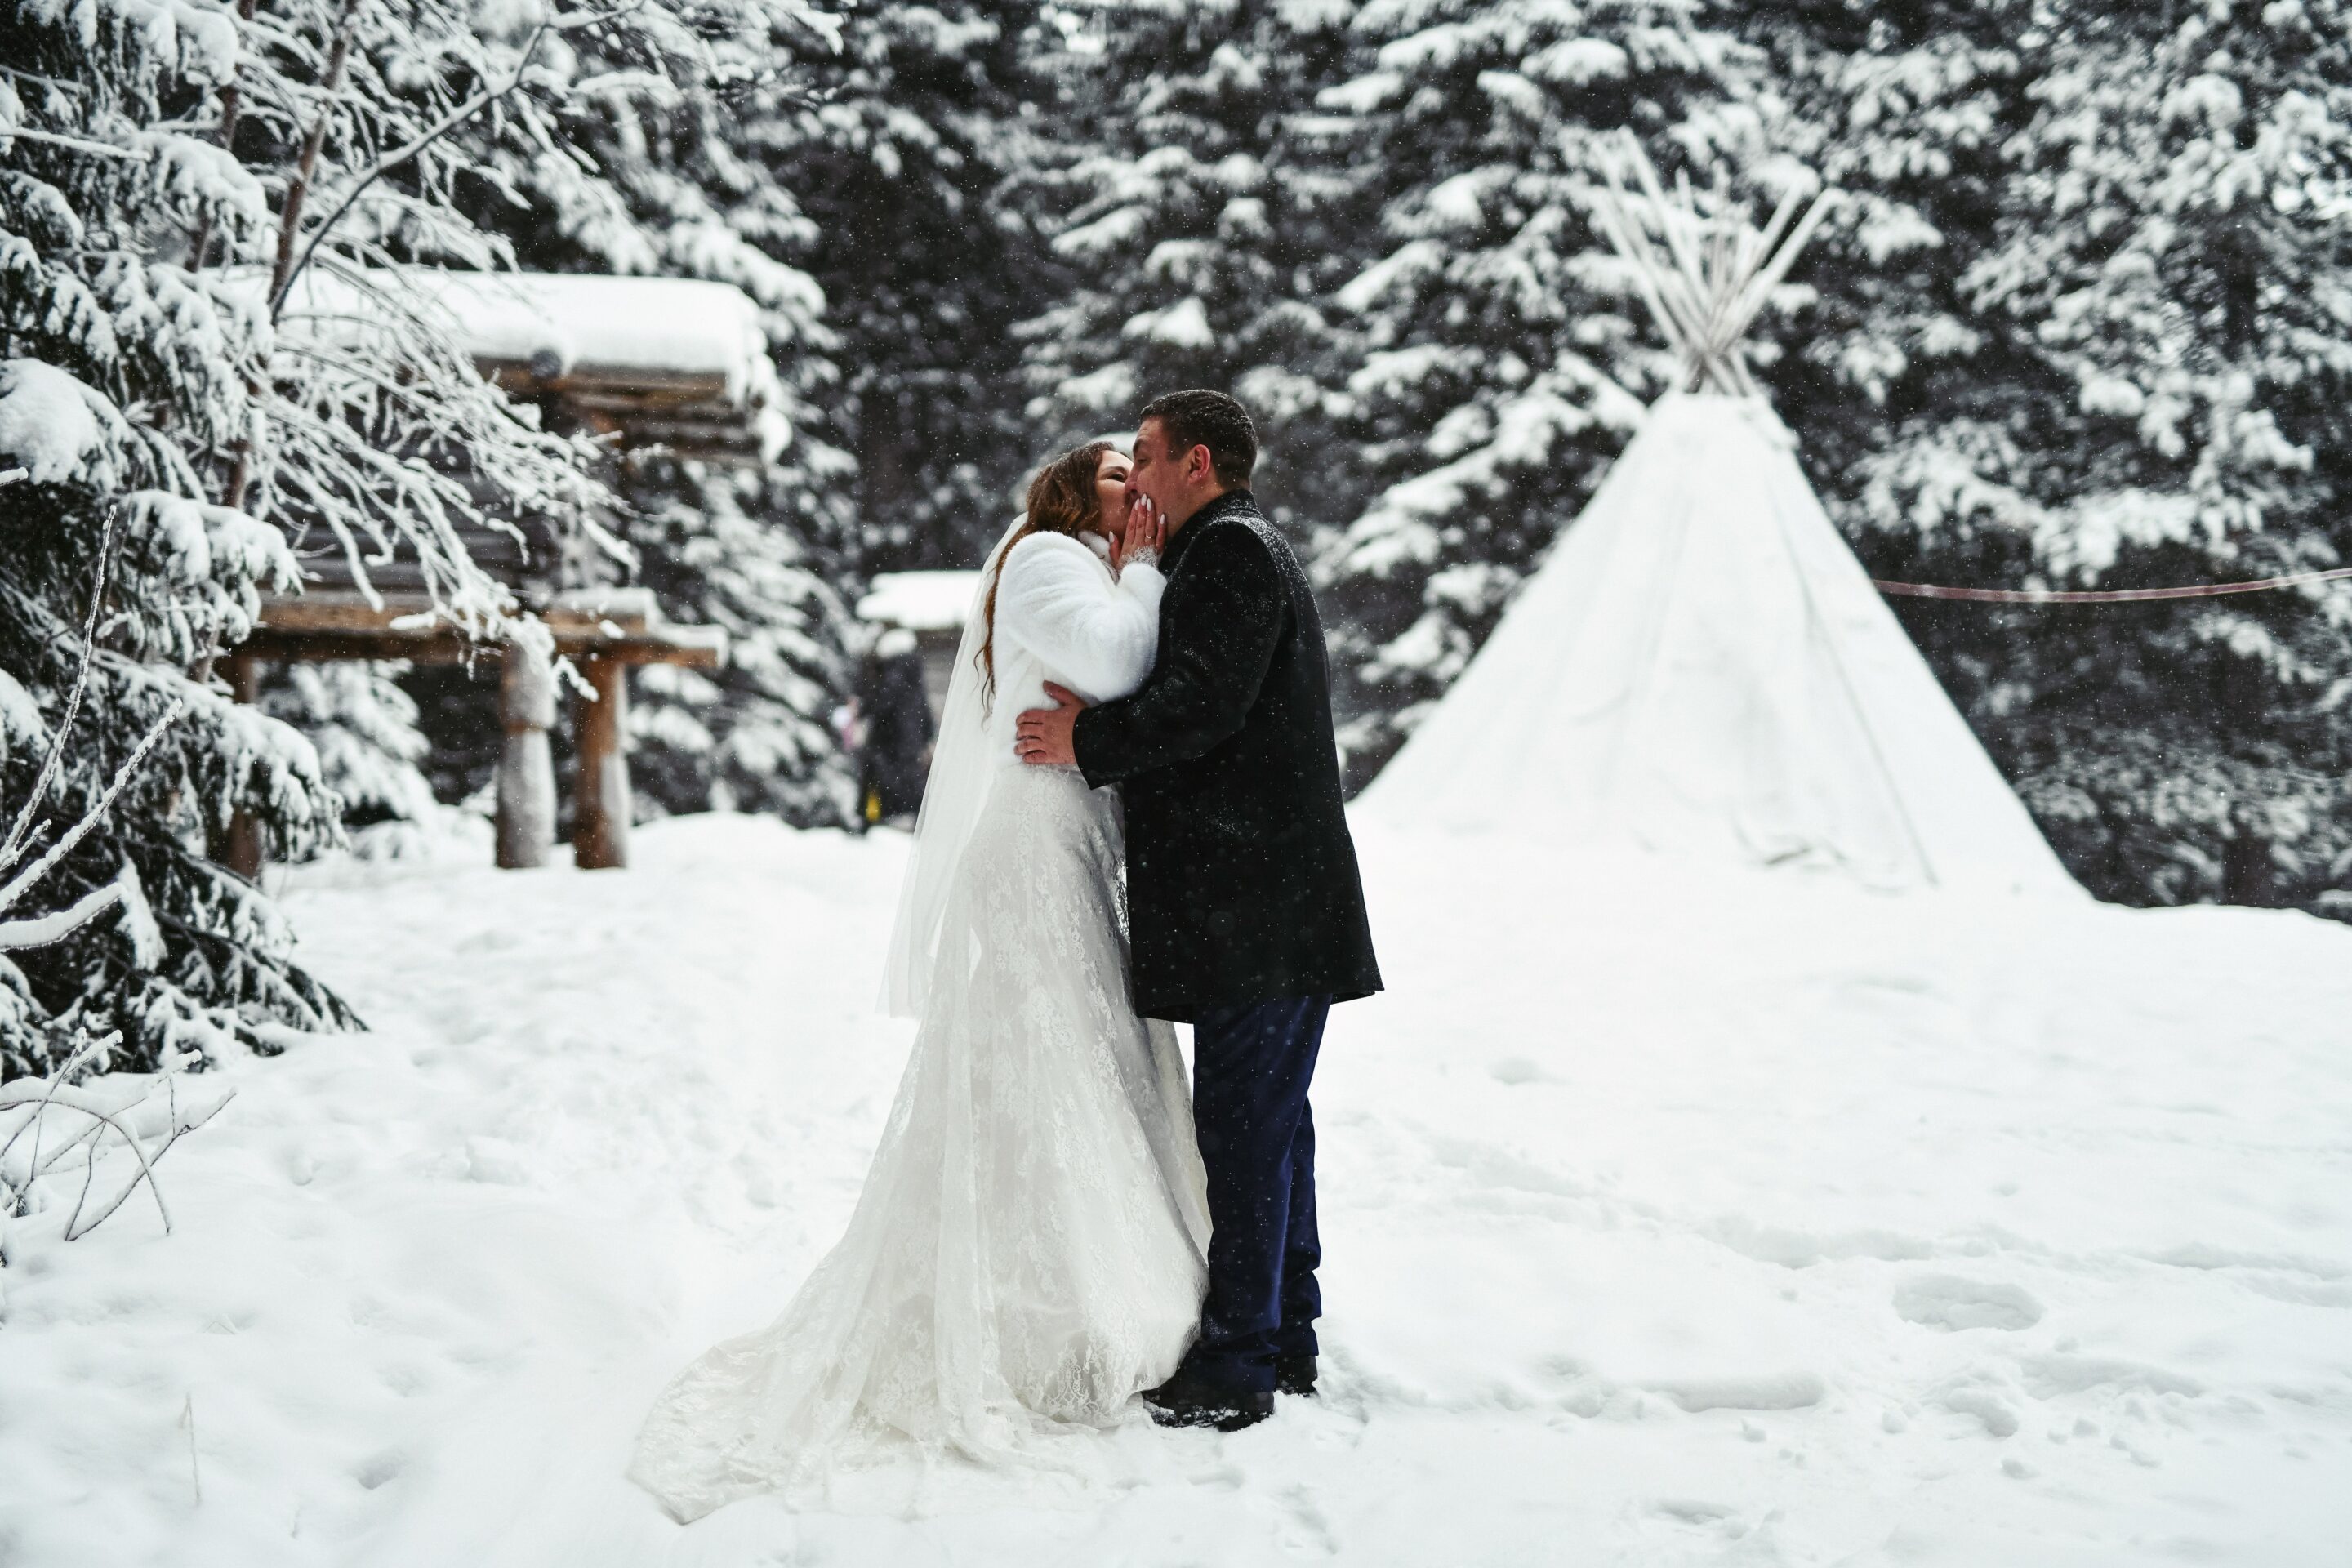 A Photographer’s Guide to Winter Weddings